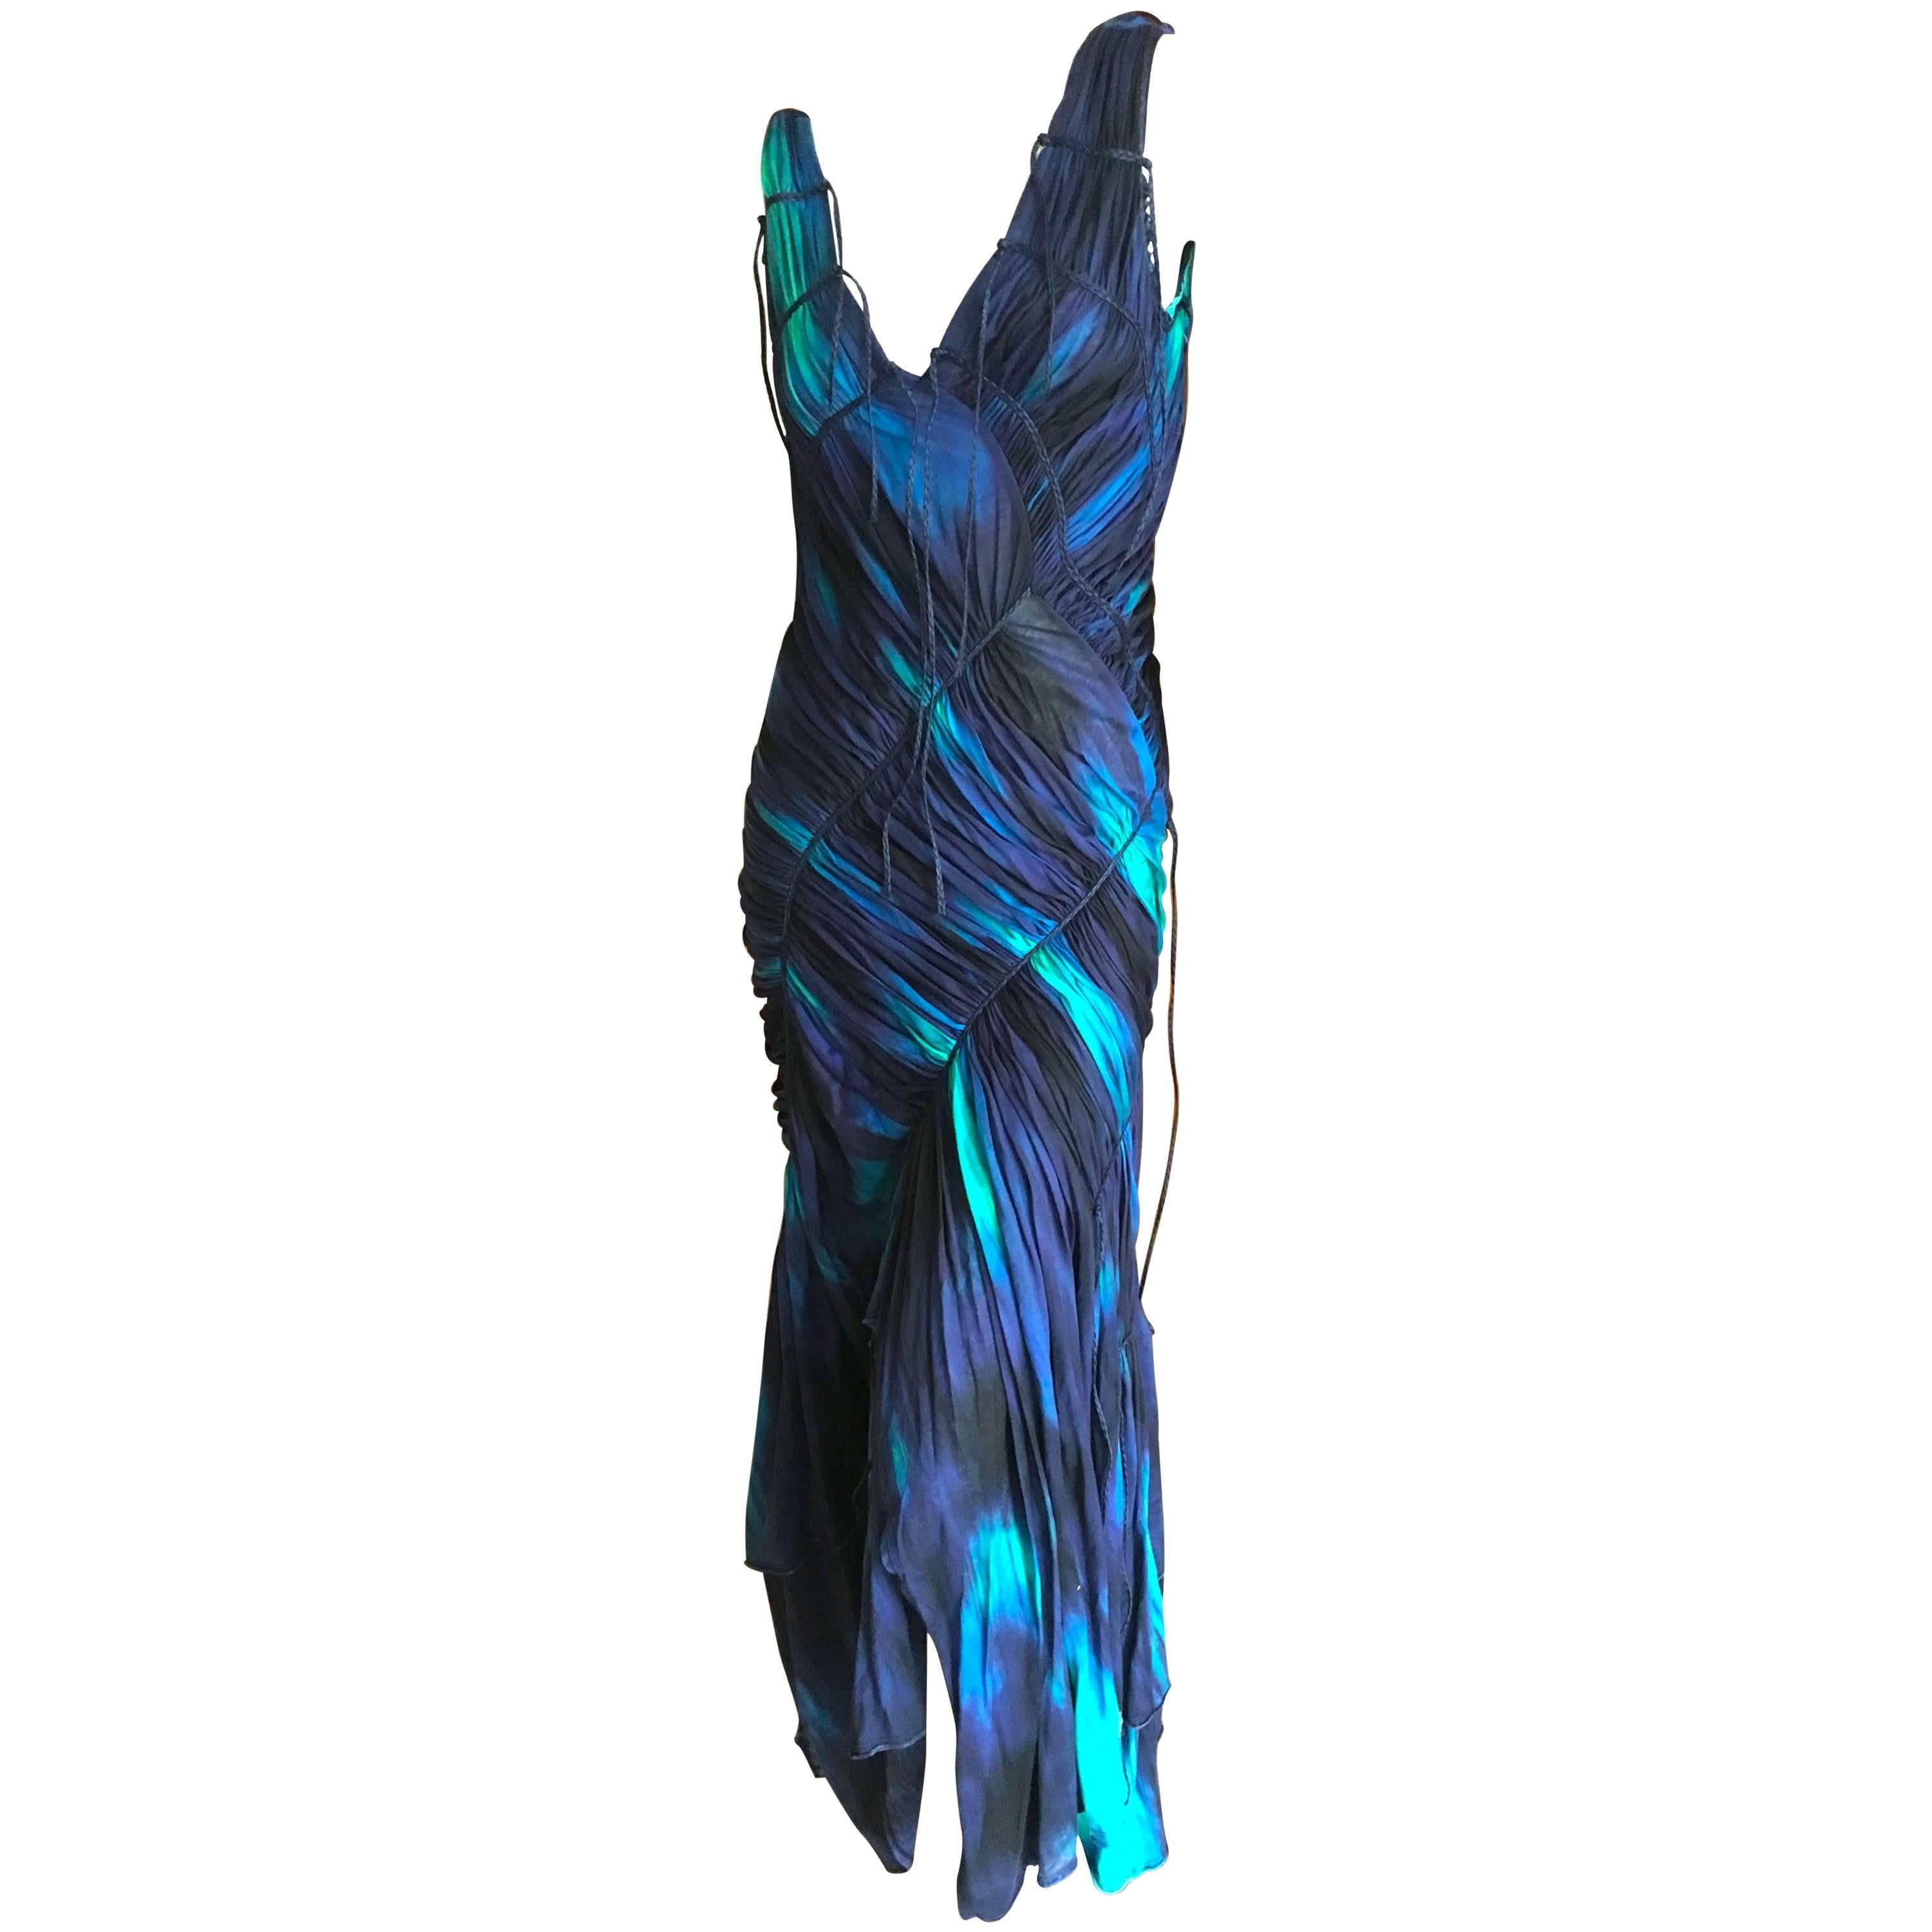 Issey Miyake Bergdorf Goodman 1990's Tie Dye Ruched Dress New with Tags